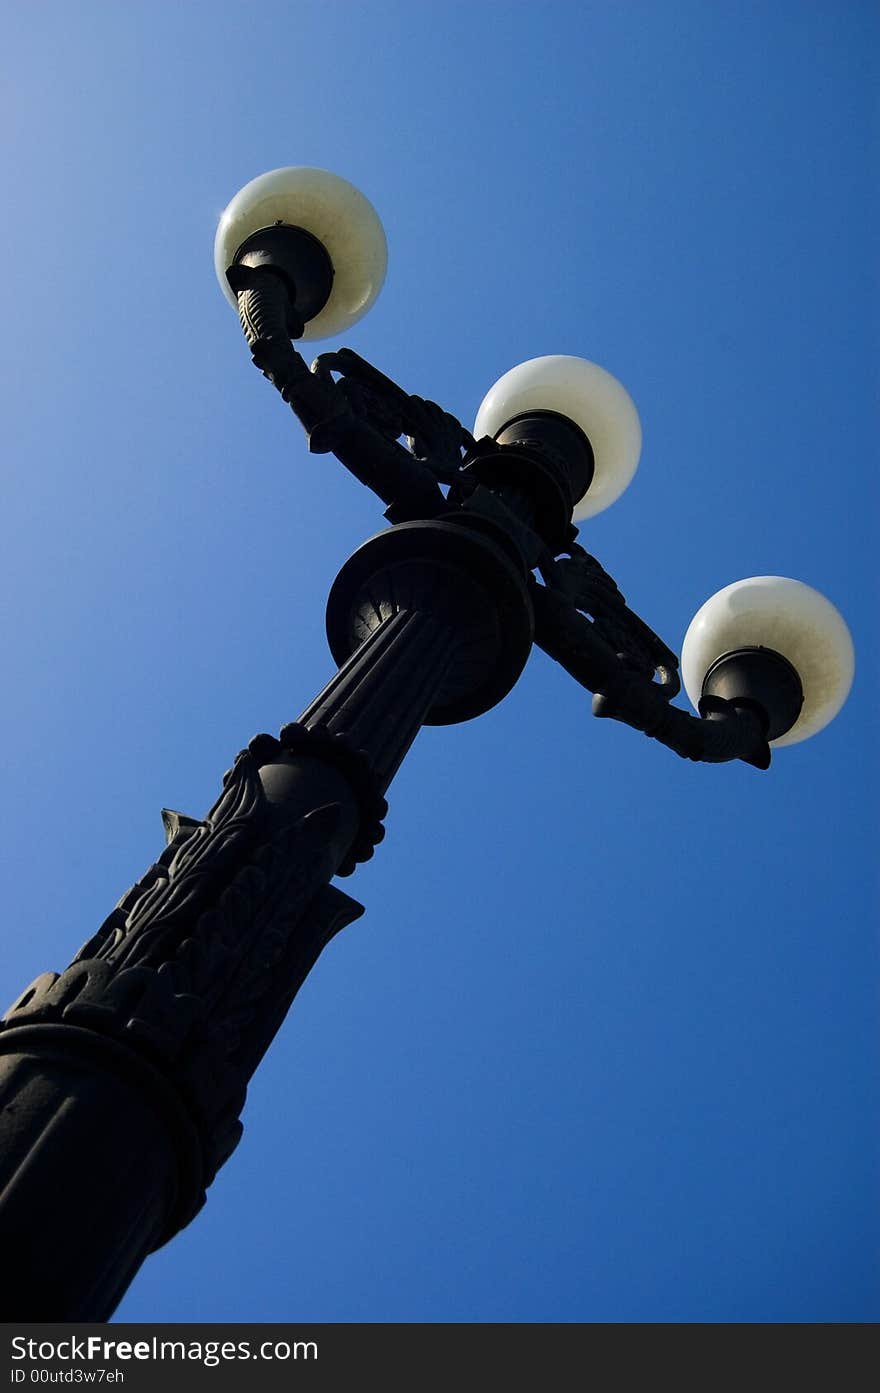 Street lamp against the backdrop of a blue sky